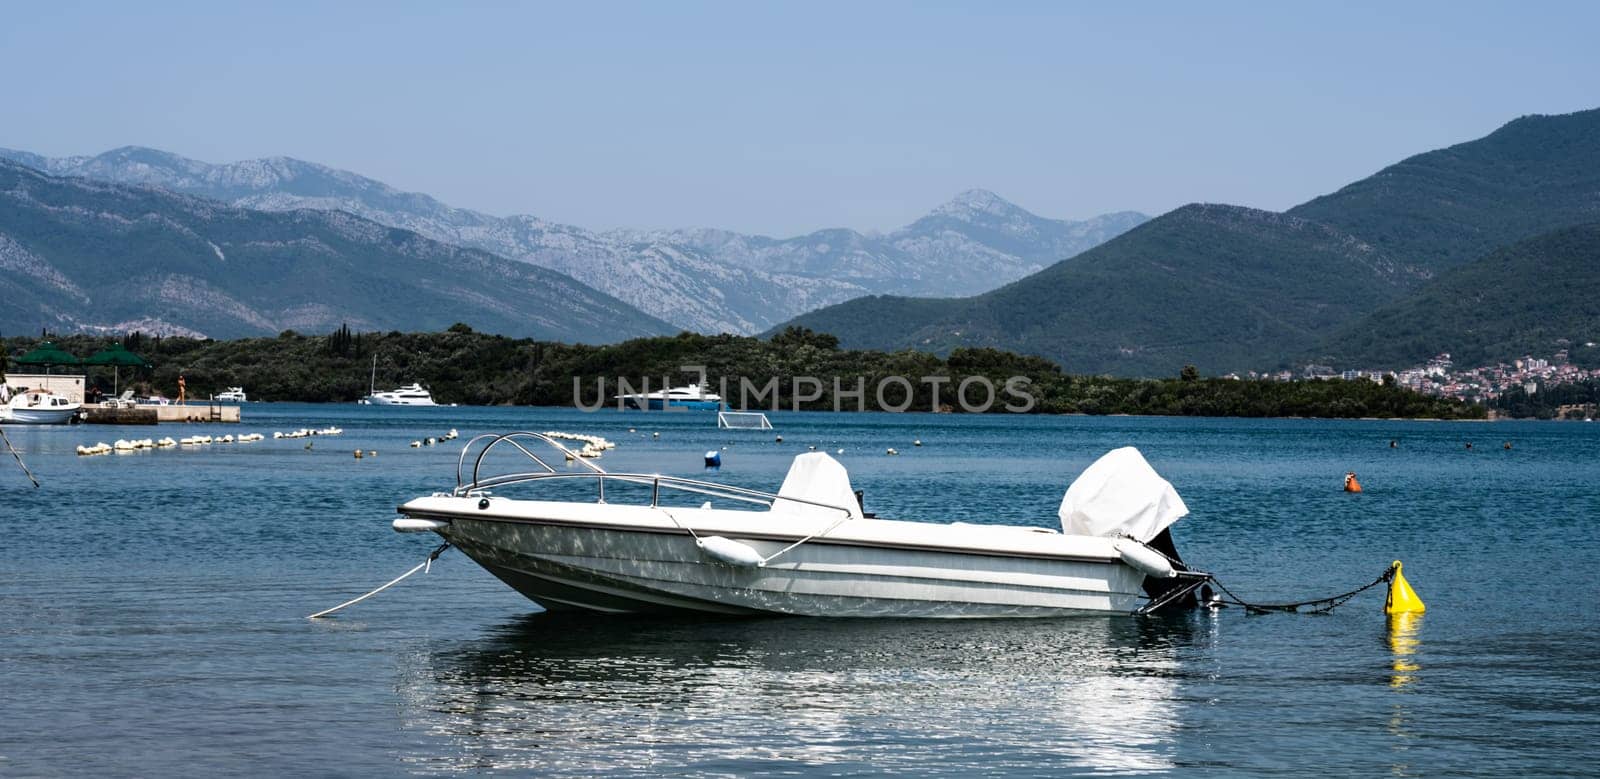 Boat in Adriatic sea, Montenegro with mountains on background. Sailboat transportaition in beautiful Mediterranean nature in sunny day